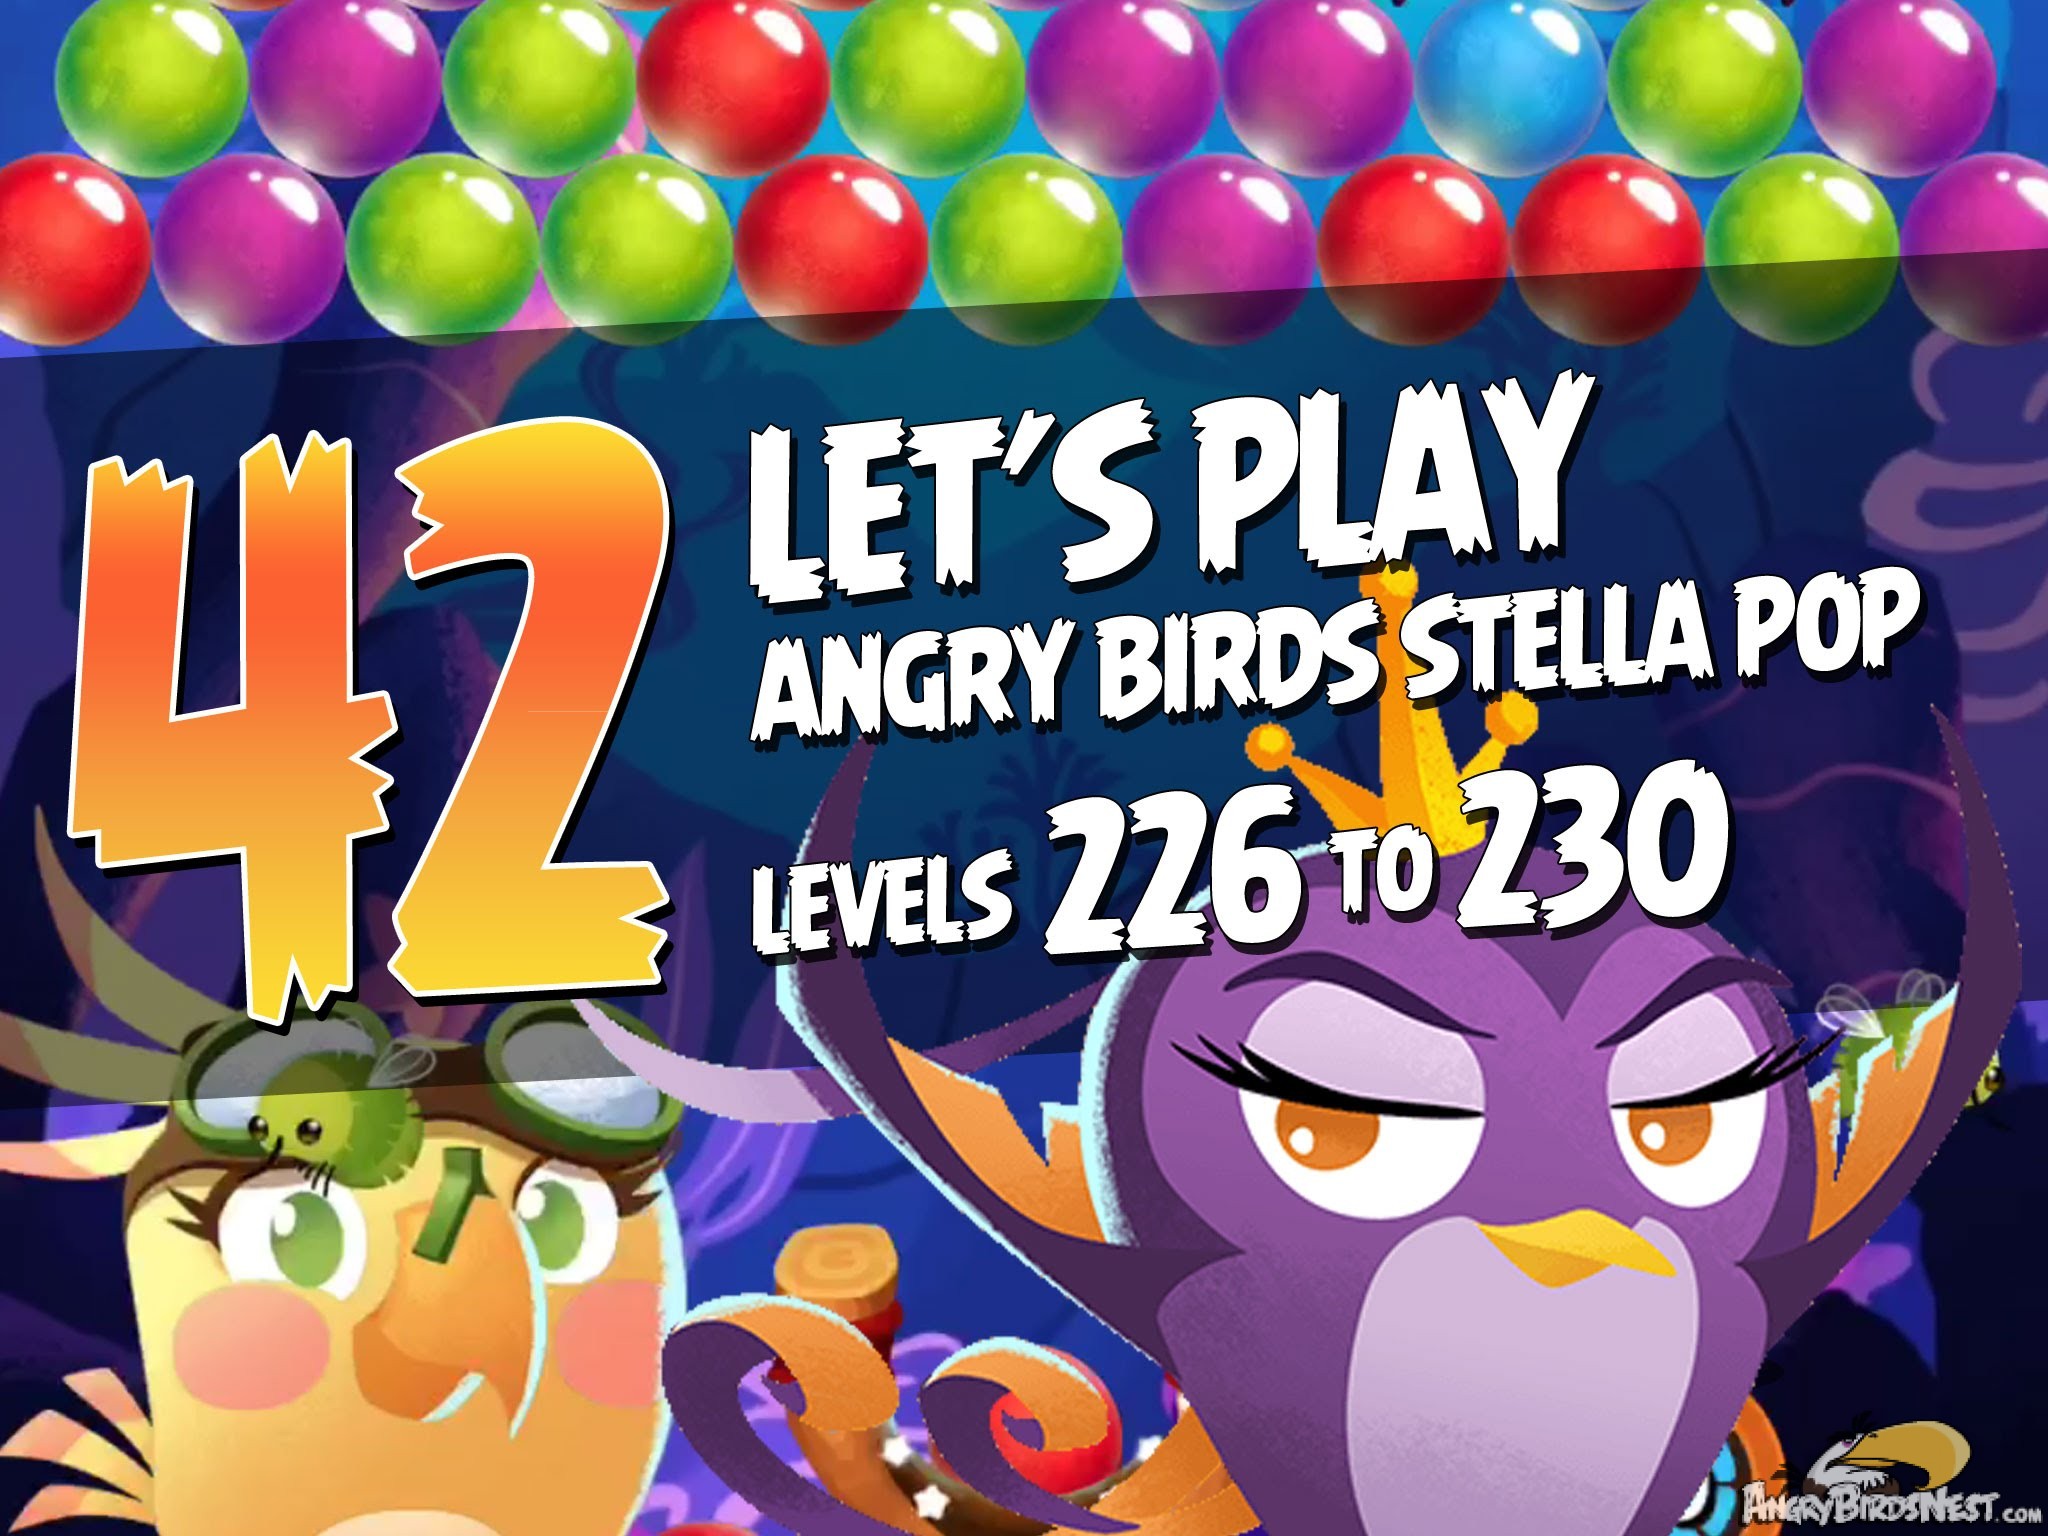 Angry Birds Stella Pop - Part 42 - Levels 226 to 230 - Underwater Adventure Image